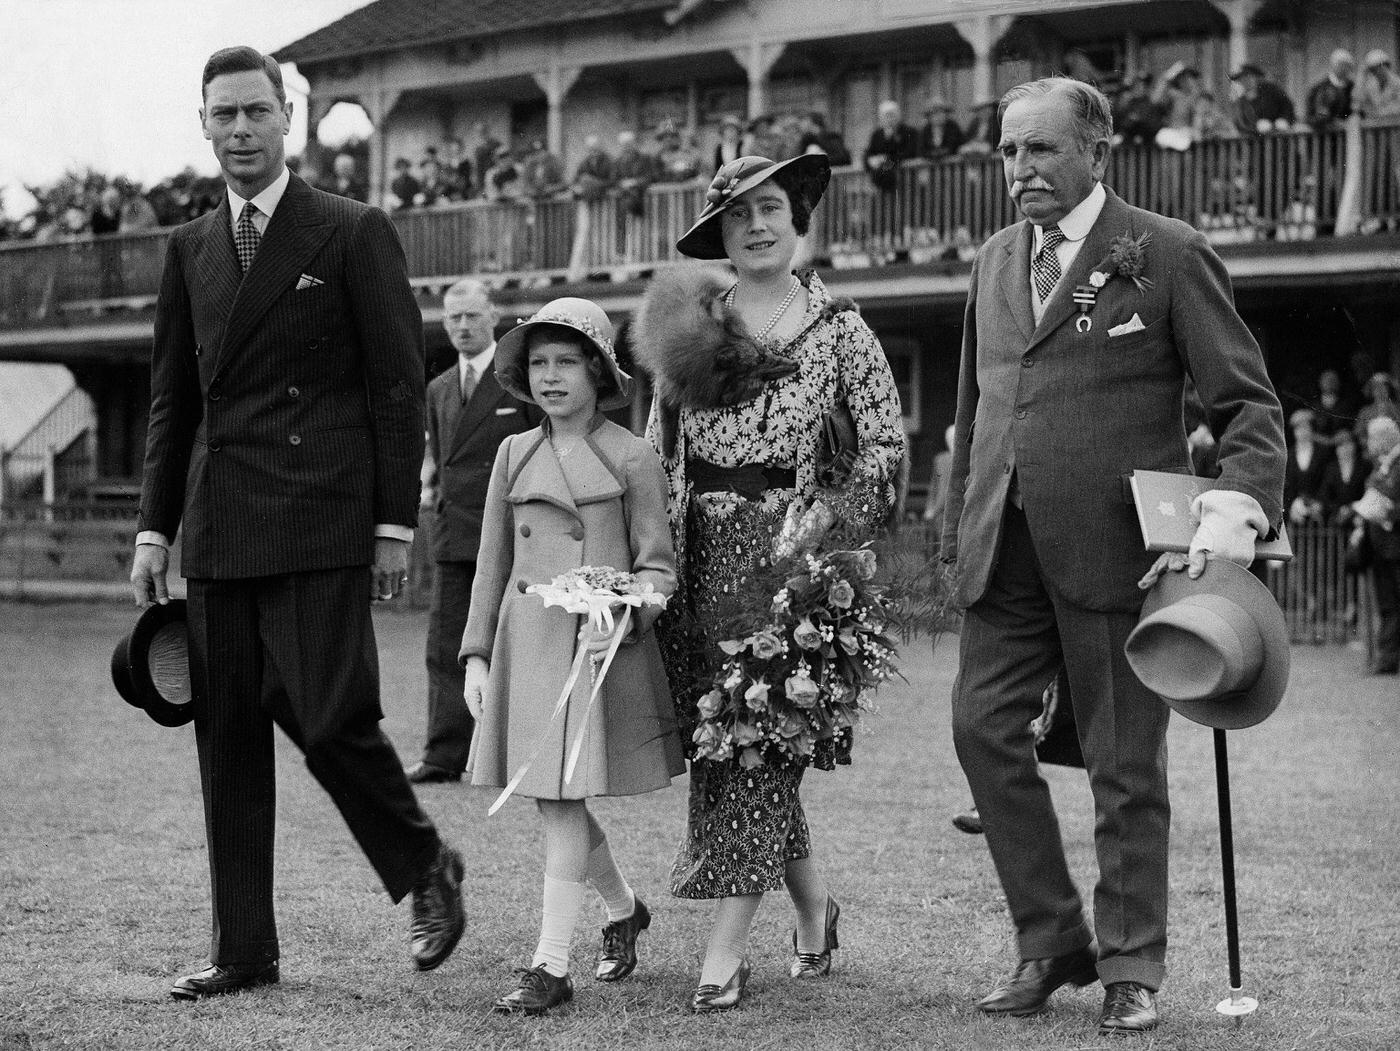 Queen Elizabeth II with King George VI and Queen Elizabeth at a children's horse race, 1936.